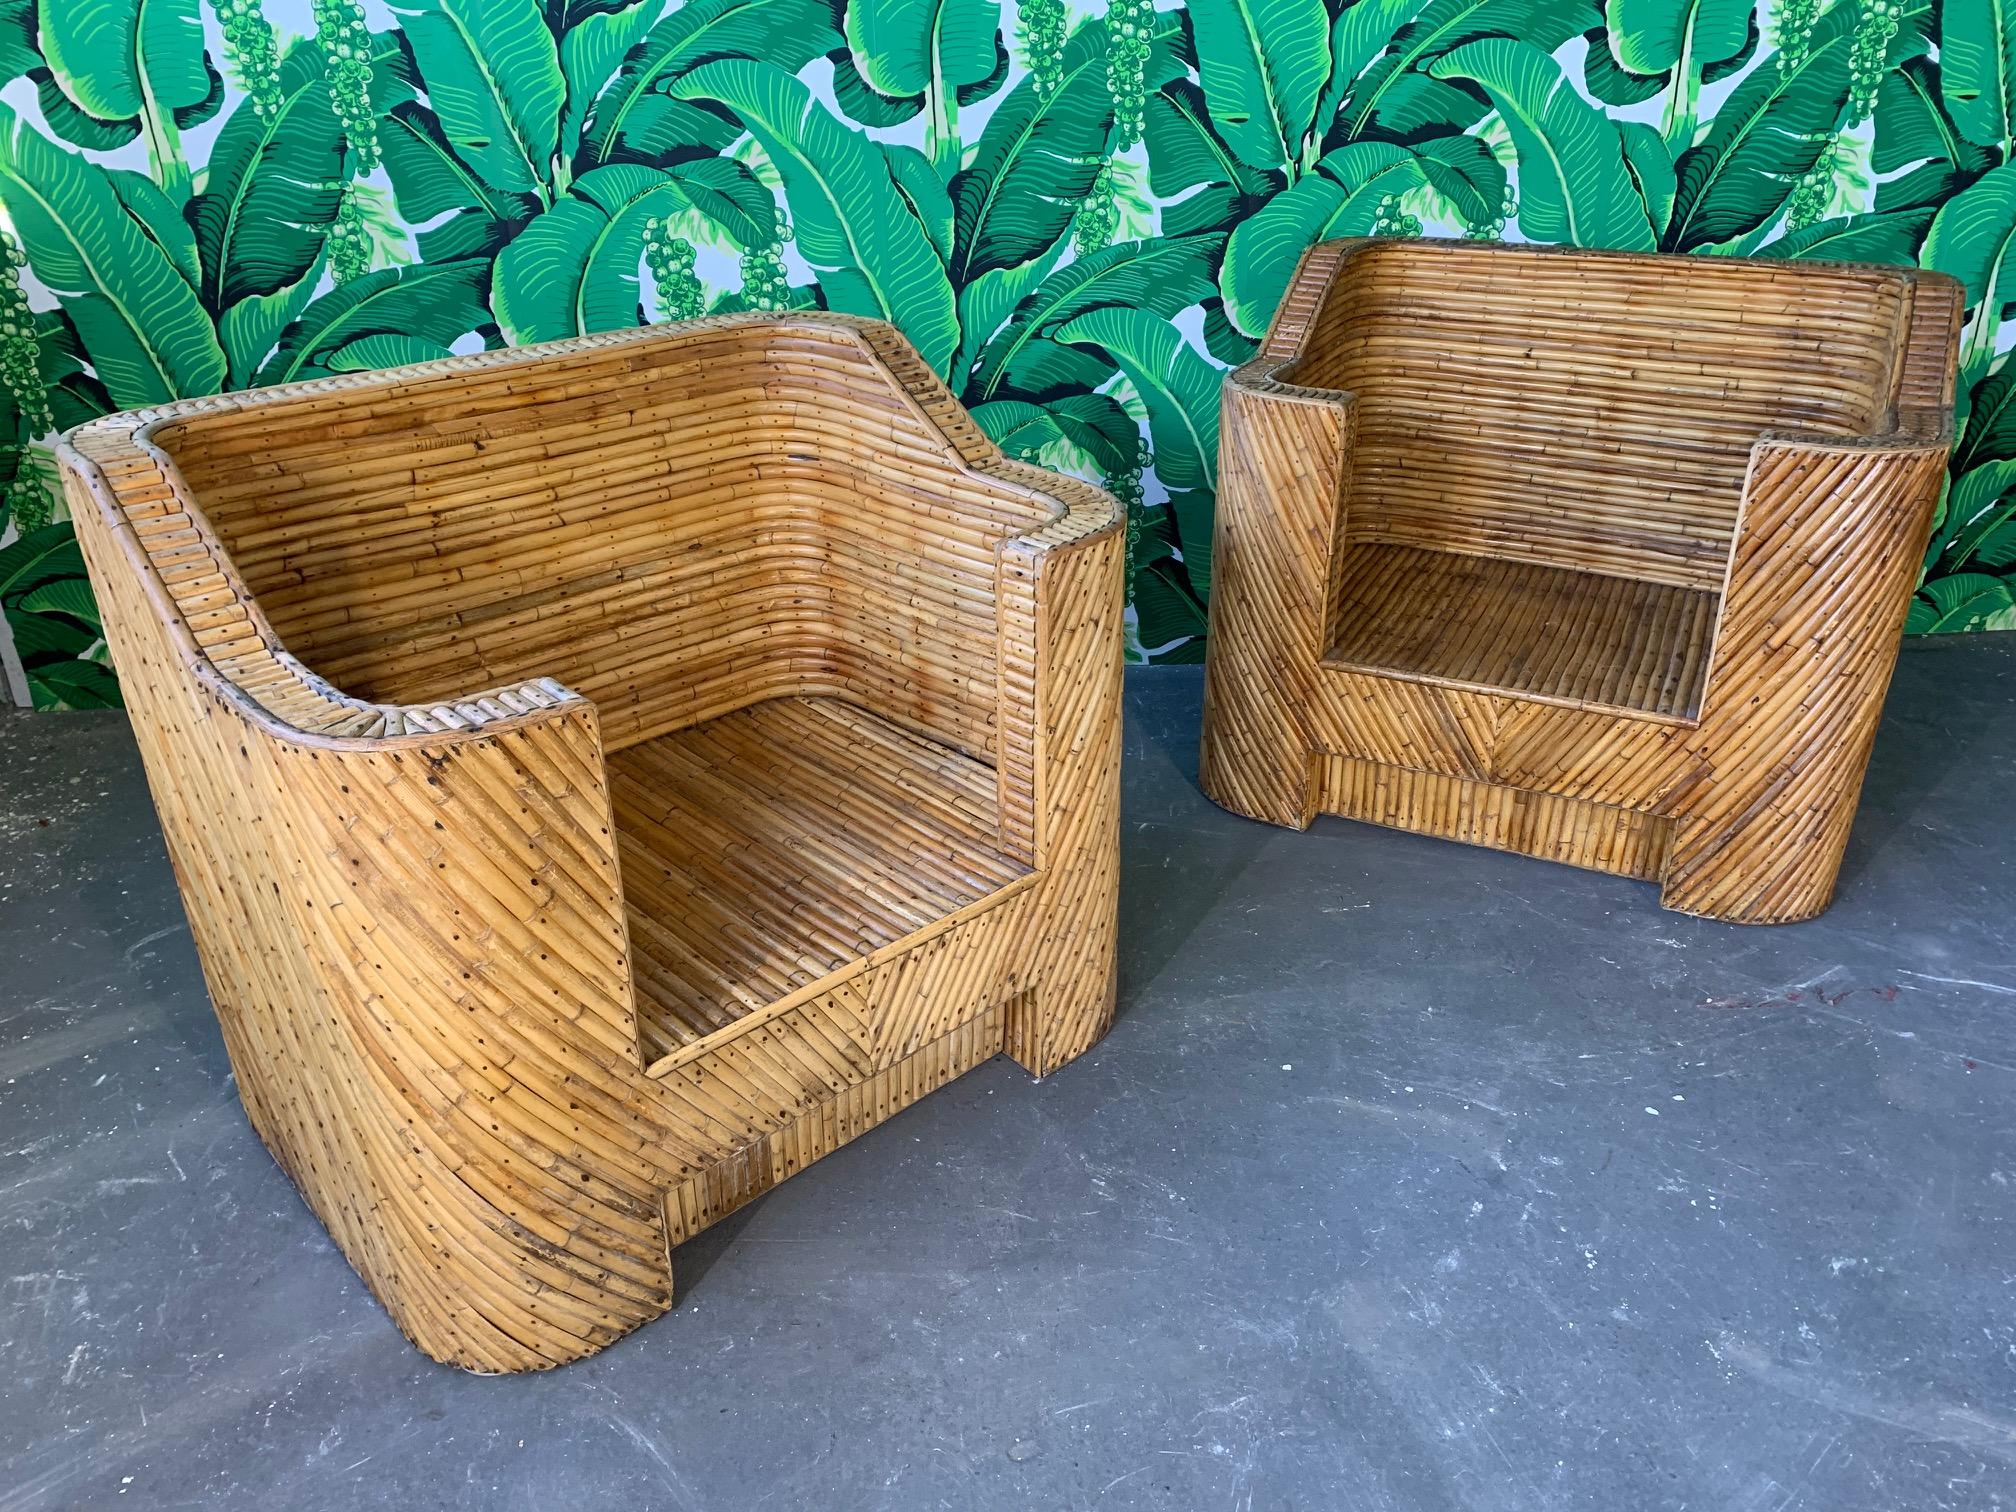 Vintage split pencil reed bamboo club chairs circa 1960s purchased by original owner in Guam. Very heavy, excellent construction, minor signs of age appropriate wear to finish.